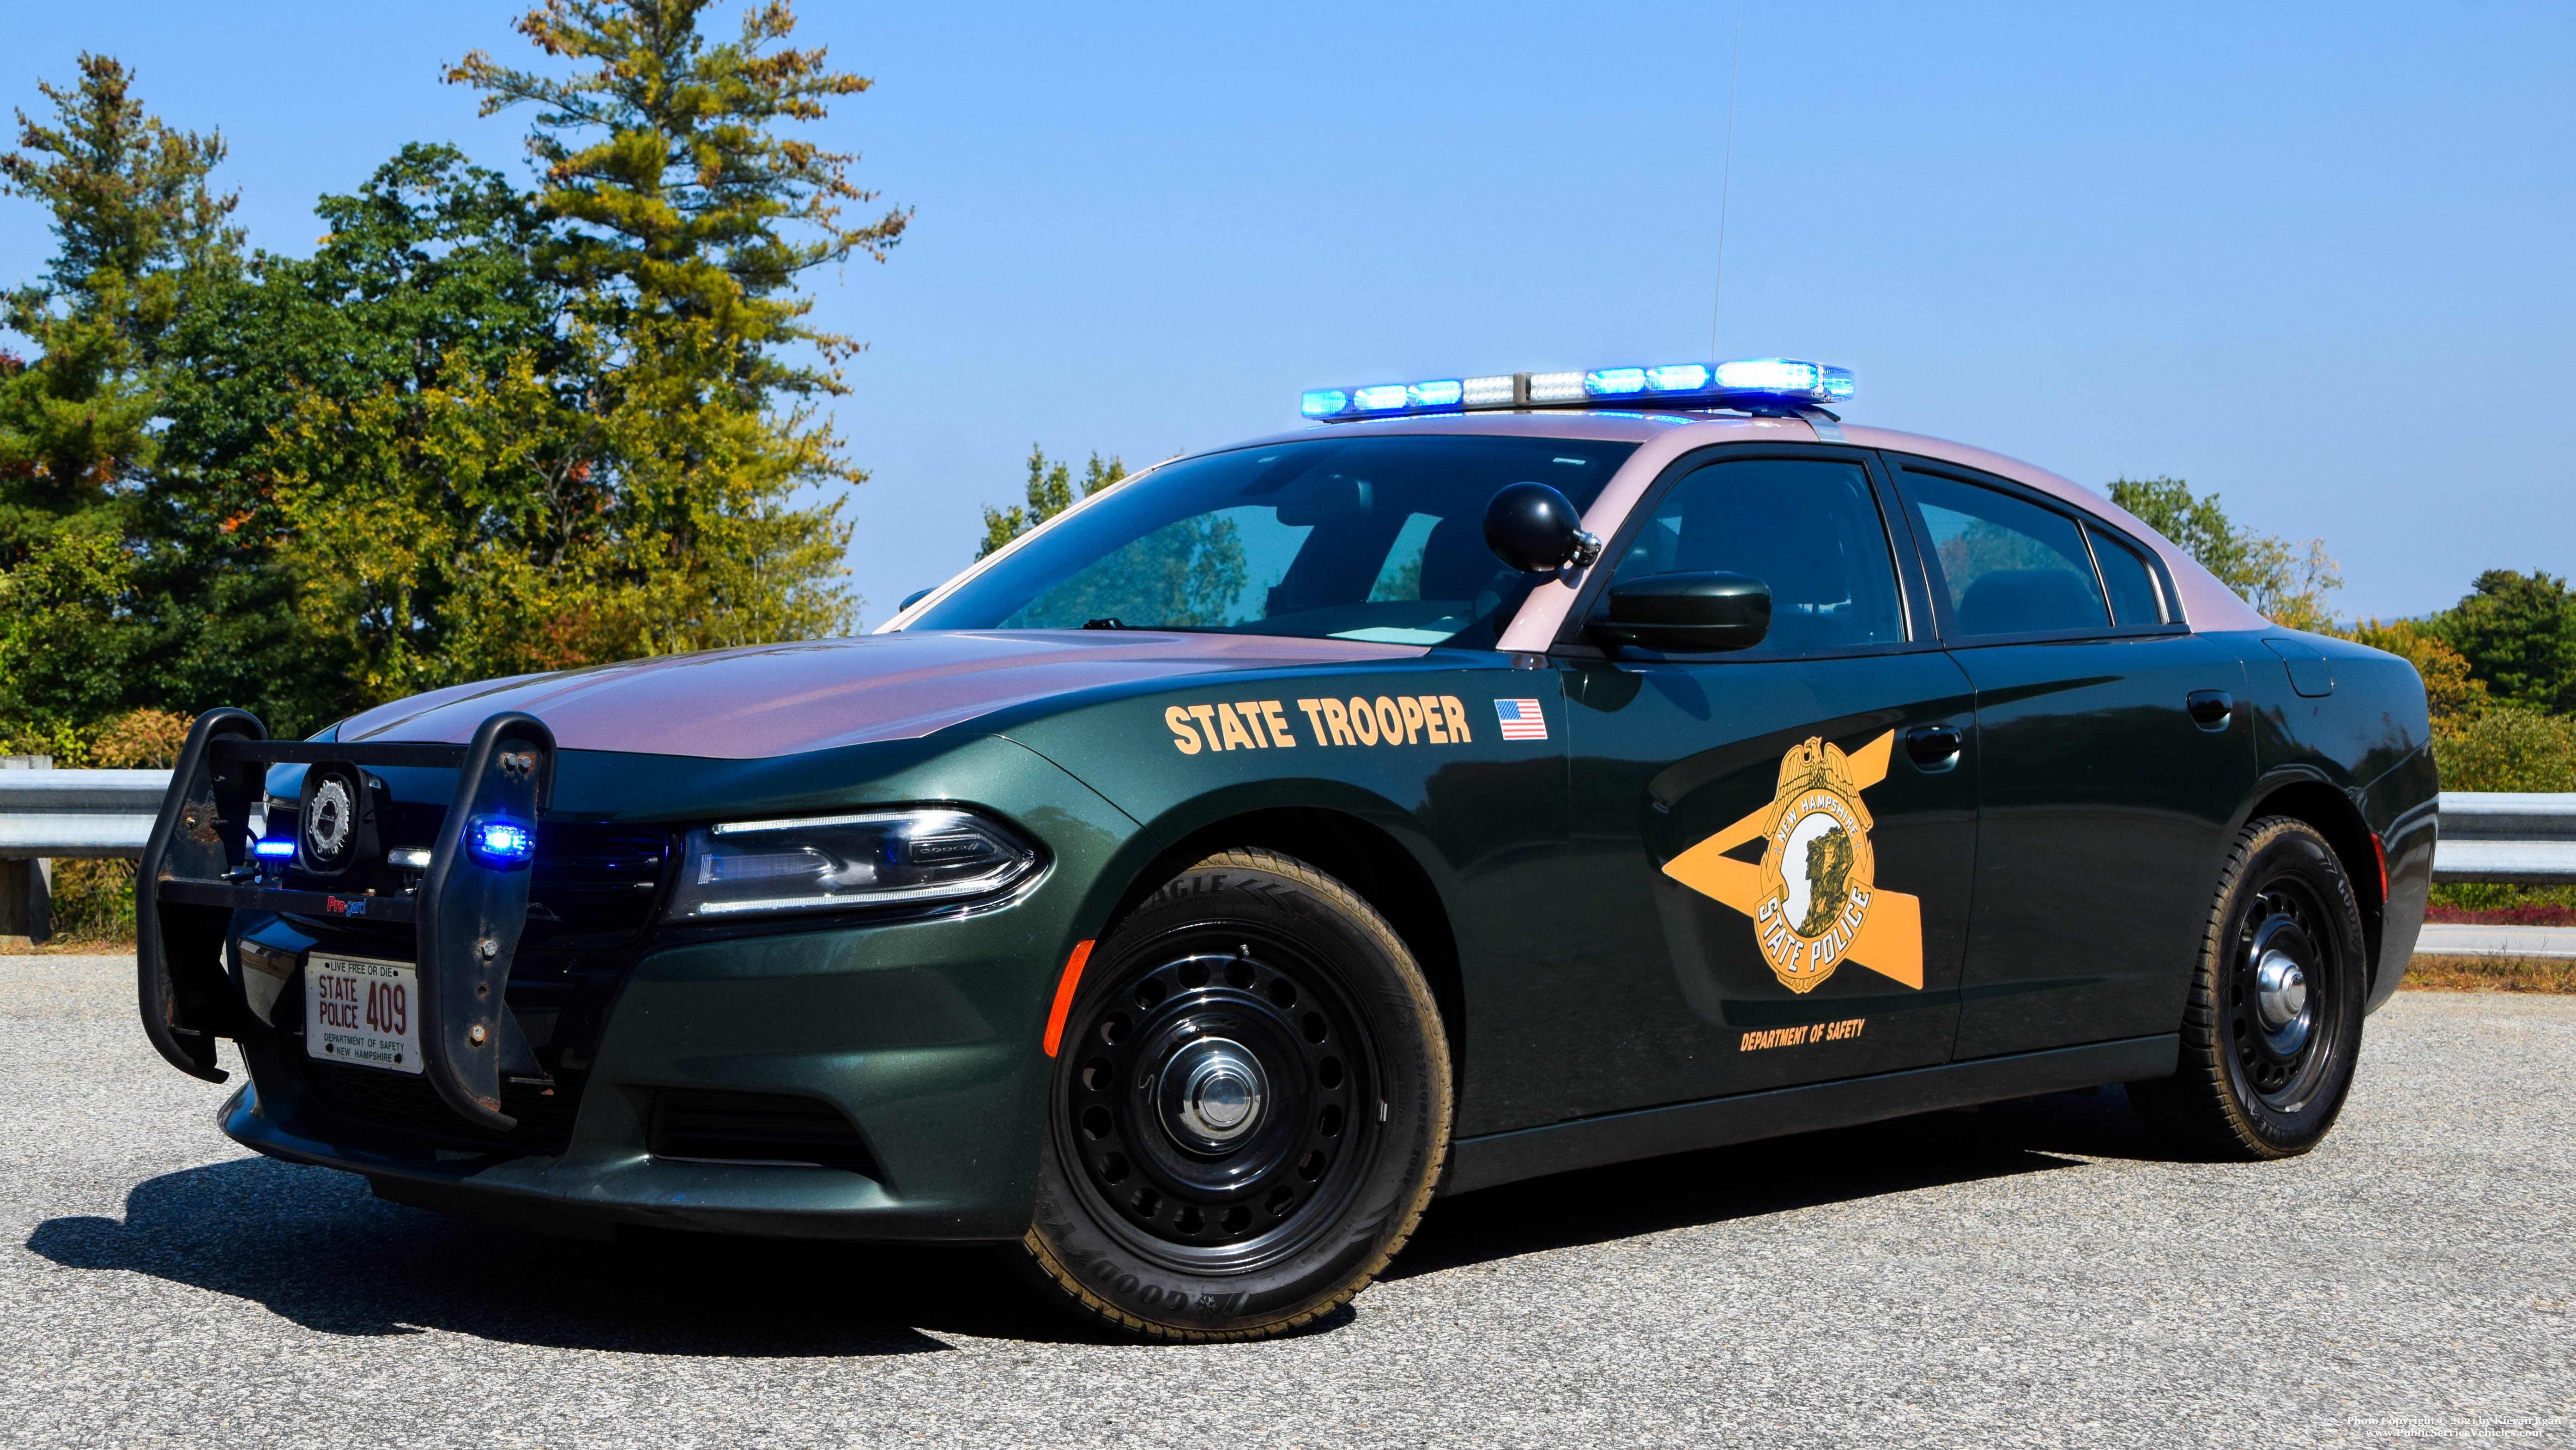 A photo  of New Hampshire State Police
            Cruiser 409, a 2015-2016 Dodge Charger             taken by Kieran Egan